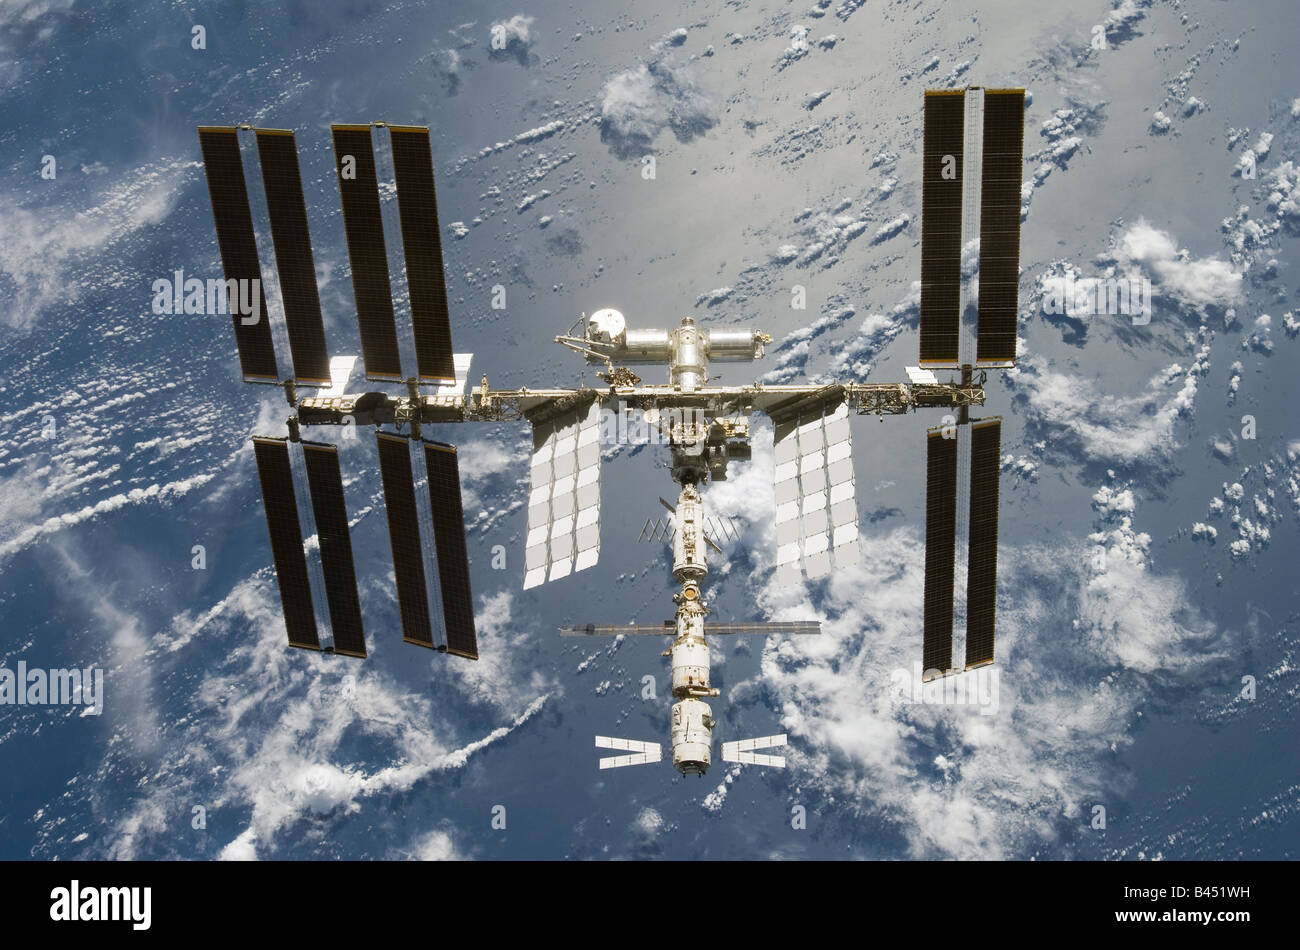 International Space Station STS 124 and earth June 11 2008 Stock Photo